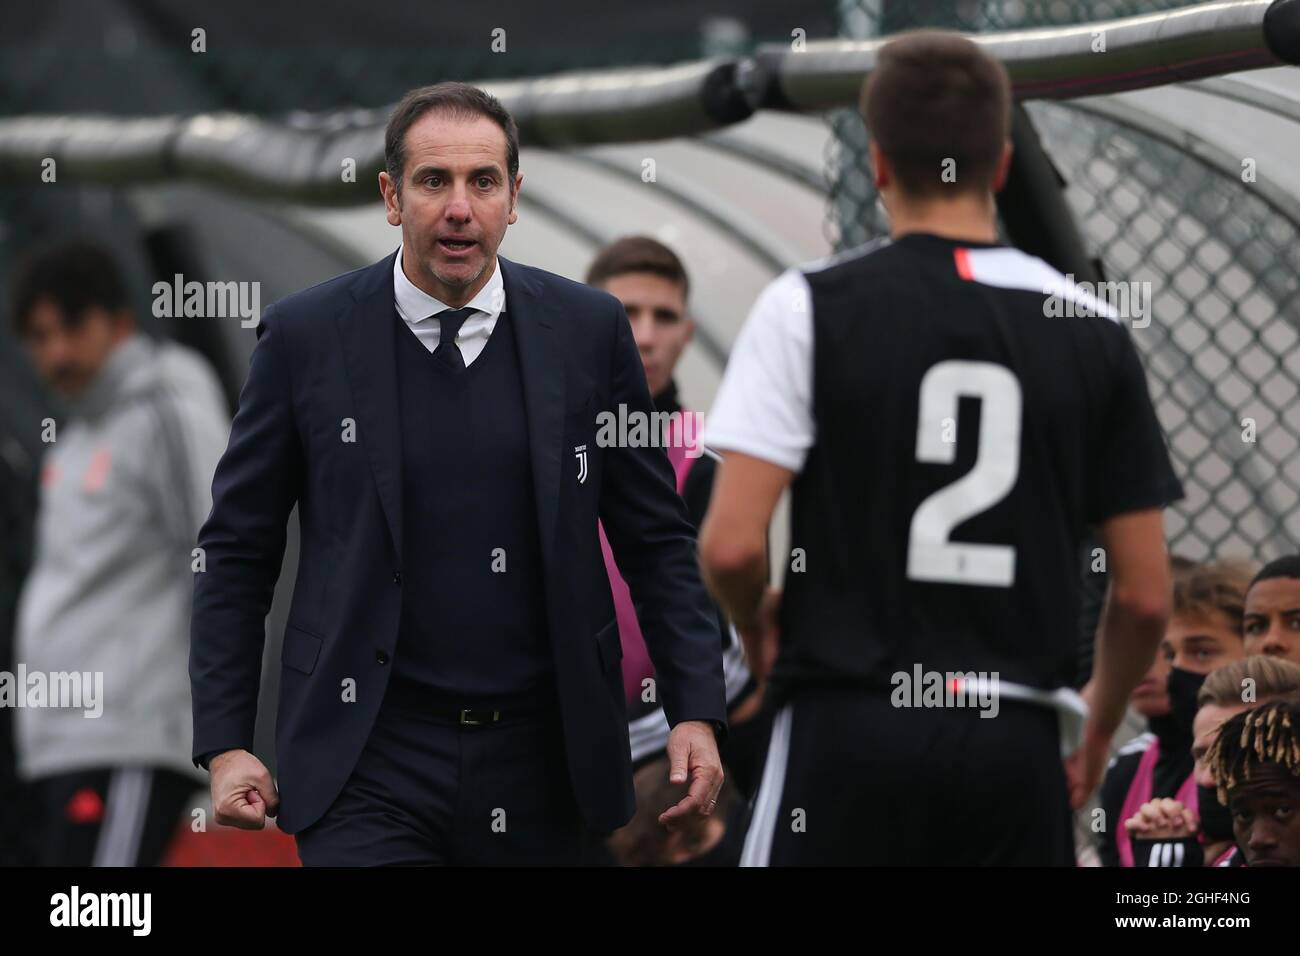 Daniel Leo of Juventus during the Serie C match between Juventus U23  News Photo - Getty Images